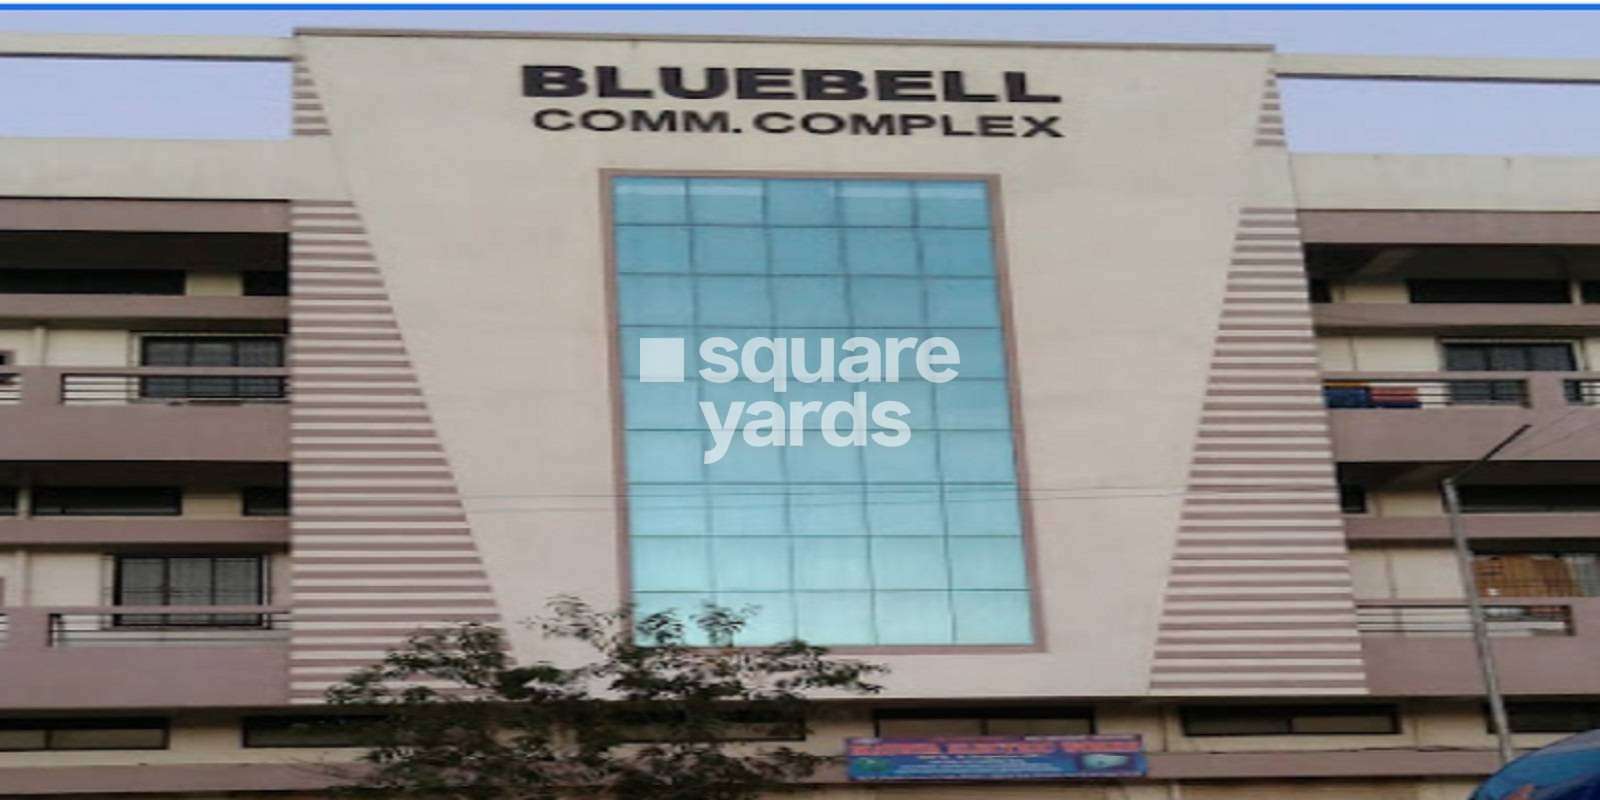 Bluebell Commercial Complex Cover Image